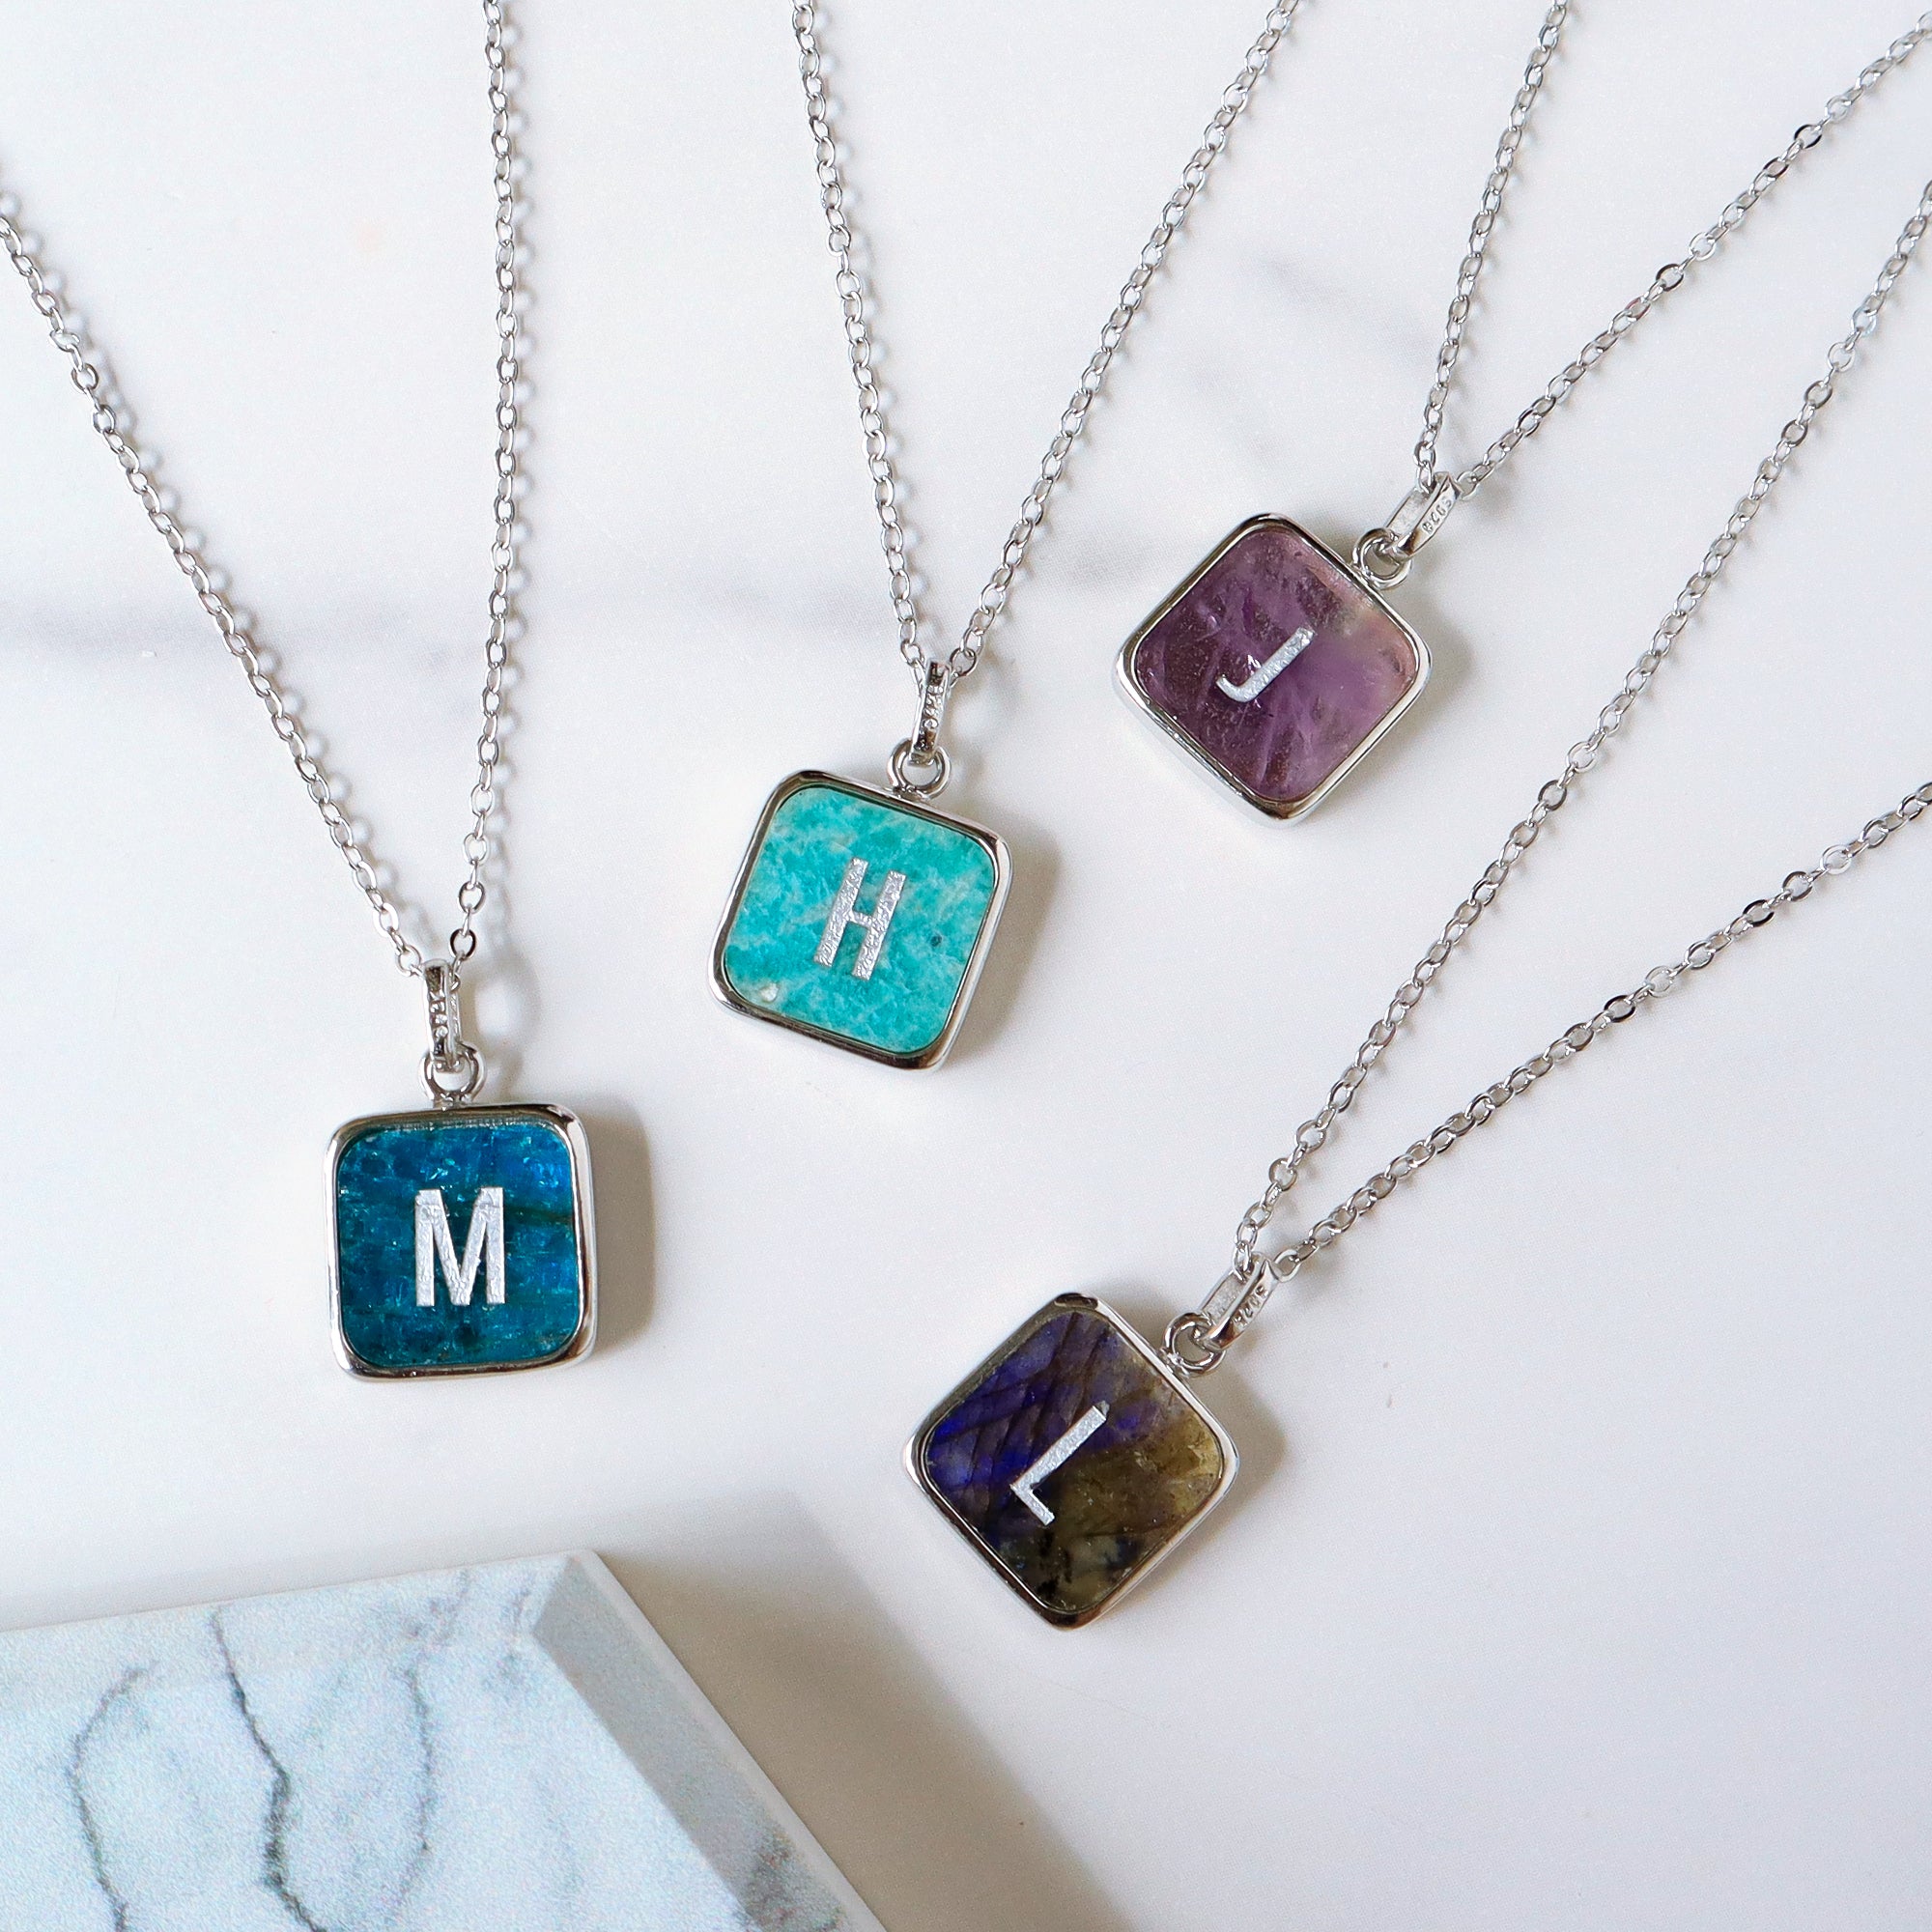 Wholesale 16" Square Silver Plated Gemstone Pendant Necklace, Carved Letters, Crystal Square Pendant Jewelry KZ002